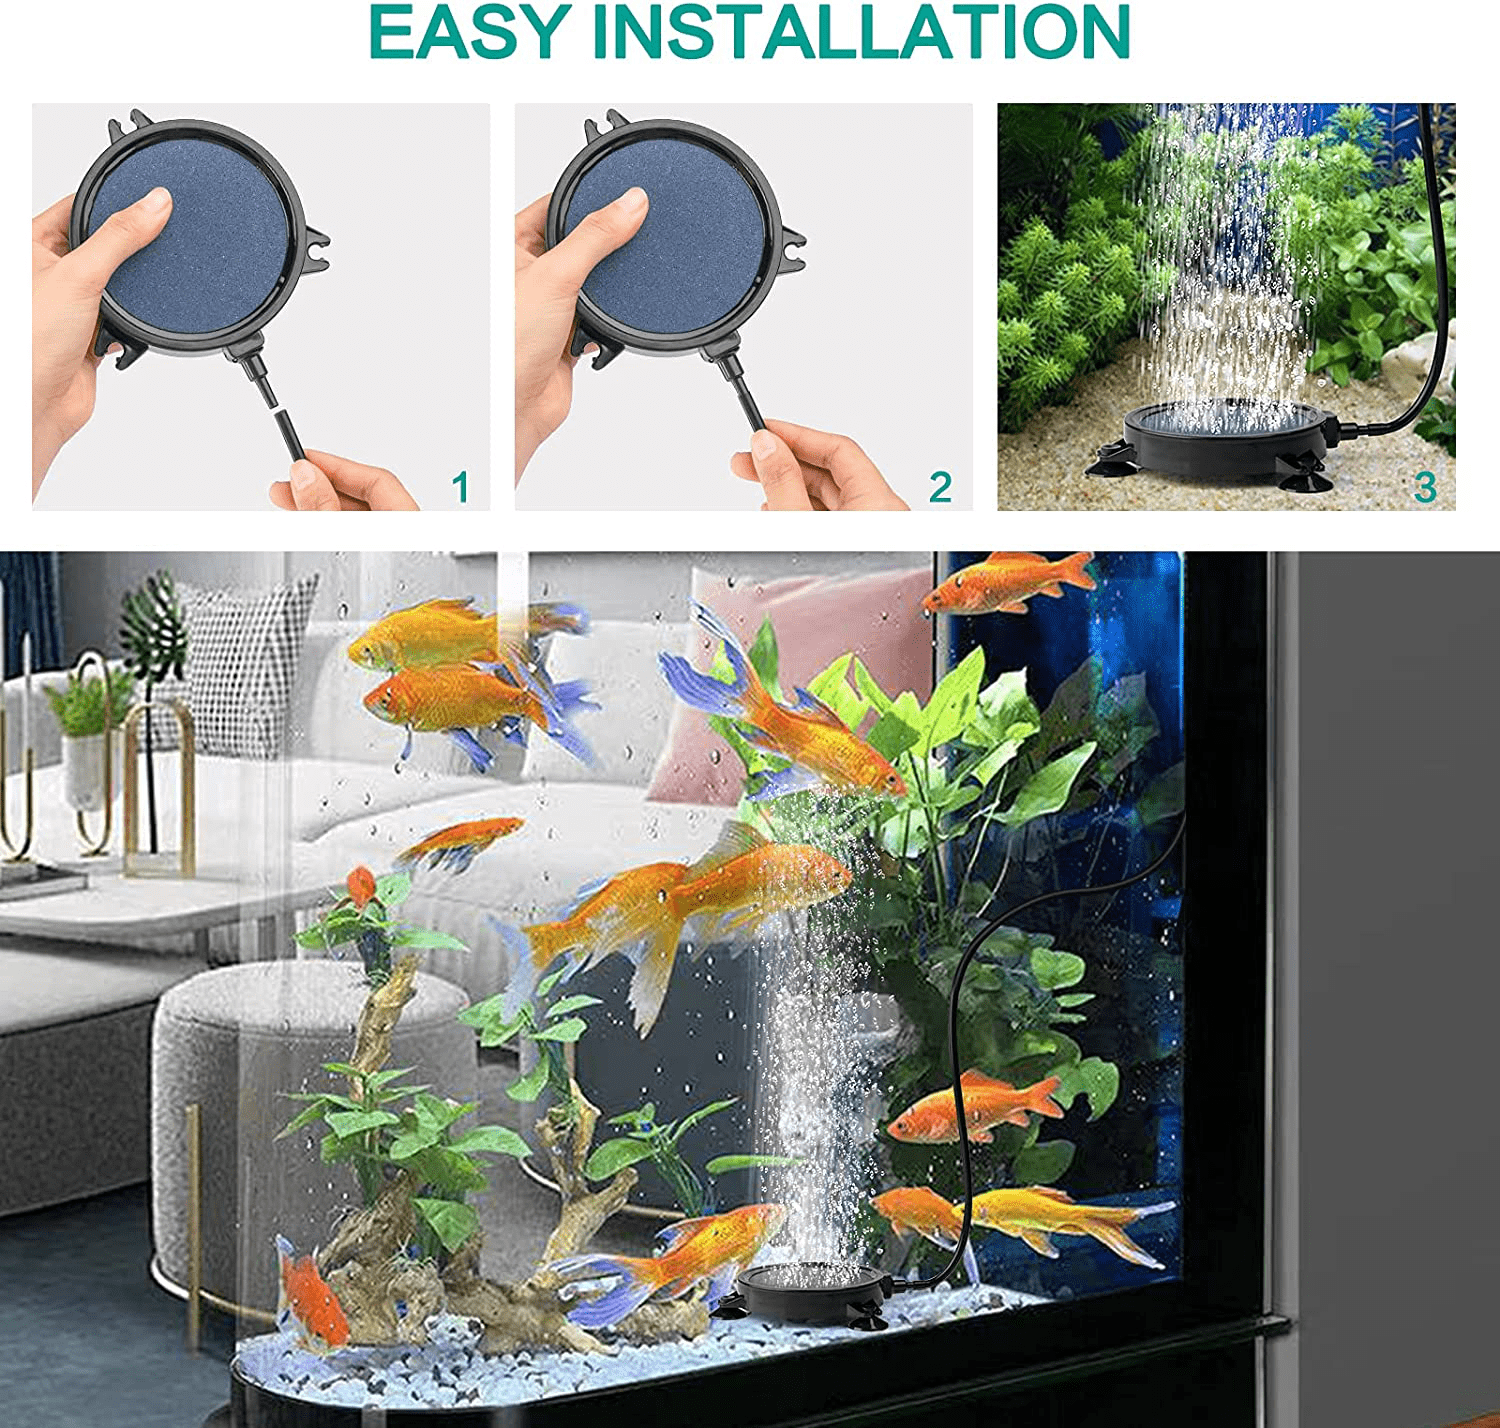 101 PCS 4 Inch Air Stone Disc Bubble Diffuser with Sucker, 52 Ft Silicone Airline Tubing with Air Pump Accessories, 4 Control Valve,4 Check Valves, 12 Suction Cups for Hydroponics Aquarium Fish Tank Animals & Pet Supplies > Pet Supplies > Fish Supplies > Aquarium Air Stones & Diffusers ToyBasics   